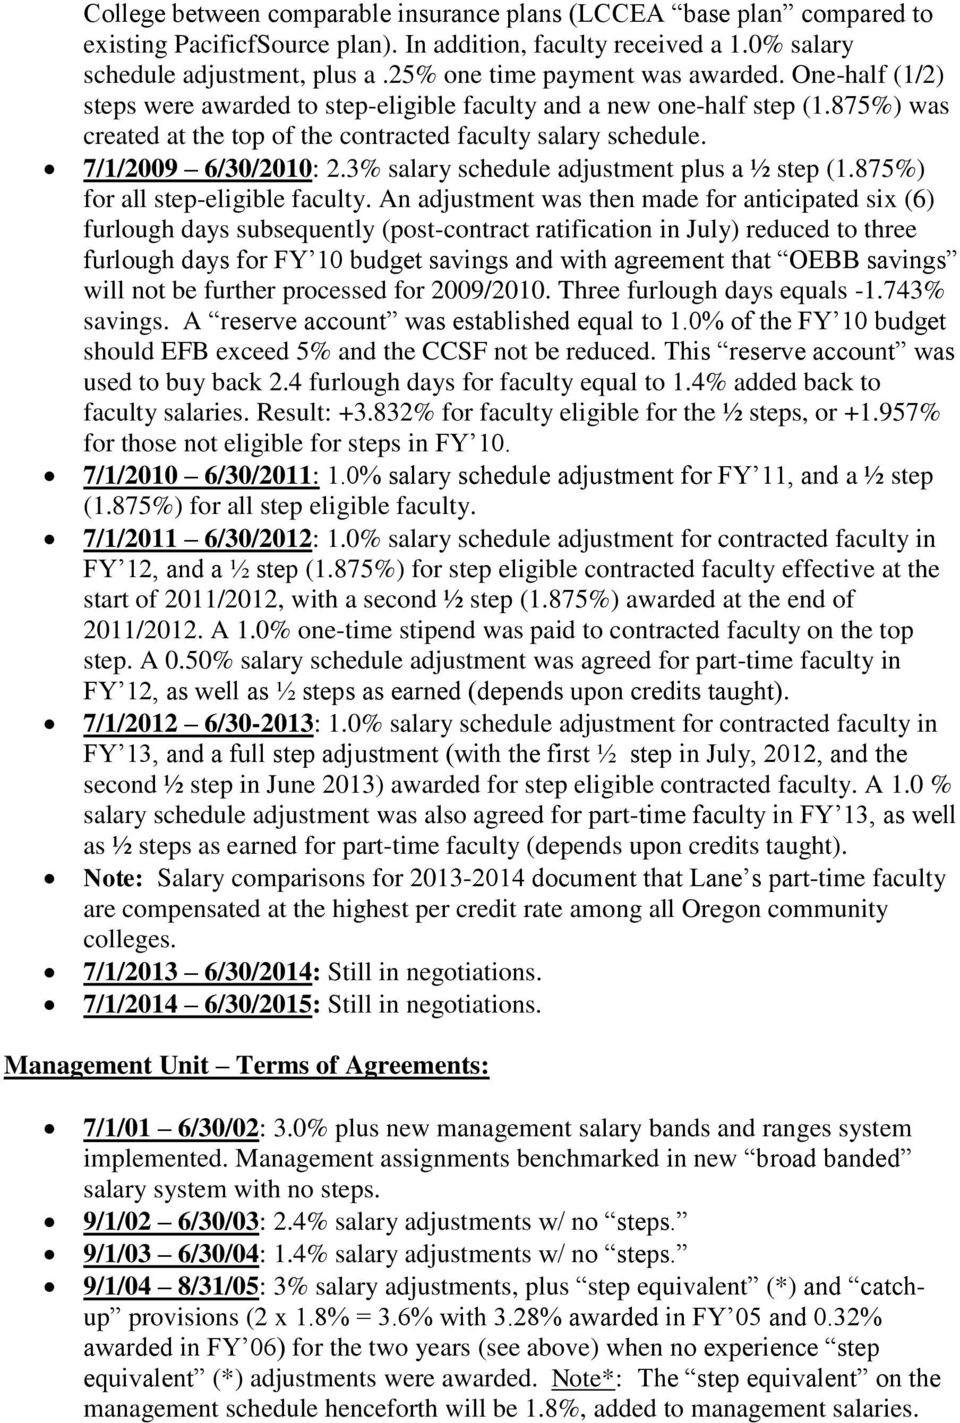 7/1/2009 6/30/2010: 2.3% salary schedule adjustment plus a ½ step (1.875%) for all step-eligible faculty.